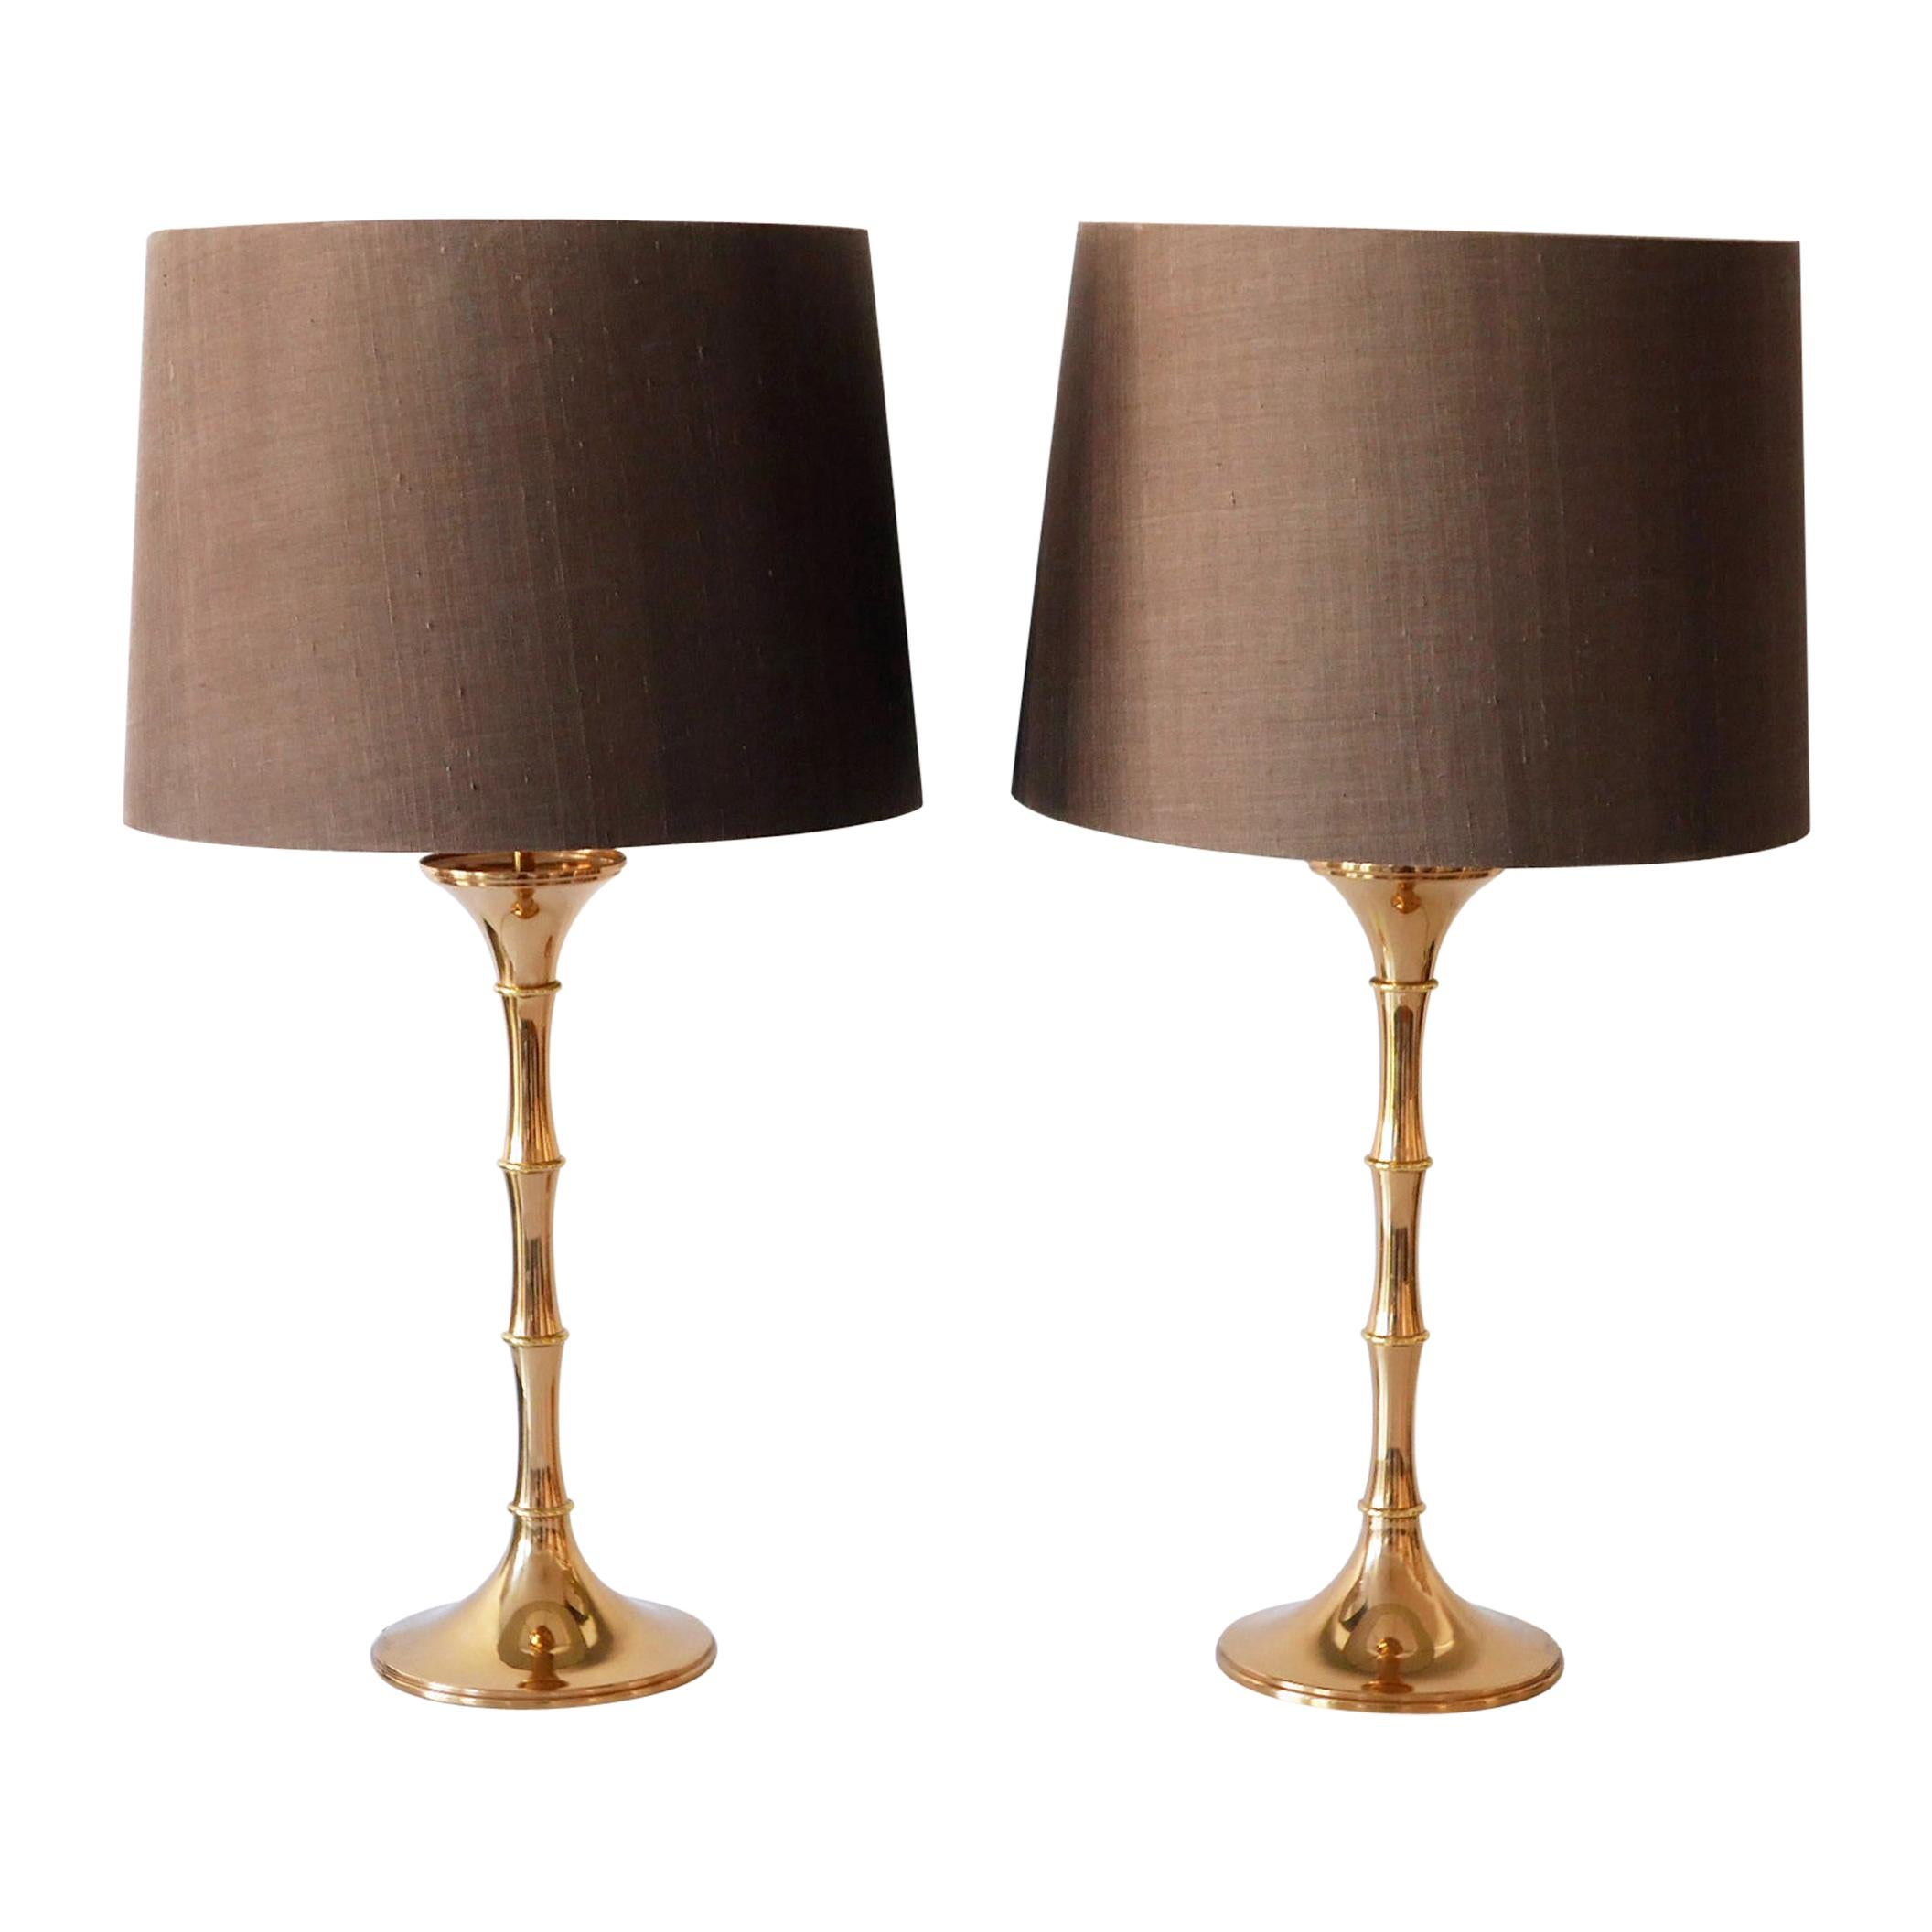 Set of Two Midcentury Brass Bamboo Table Lamps ML1 by Ingo Maurer, 1968, Germany